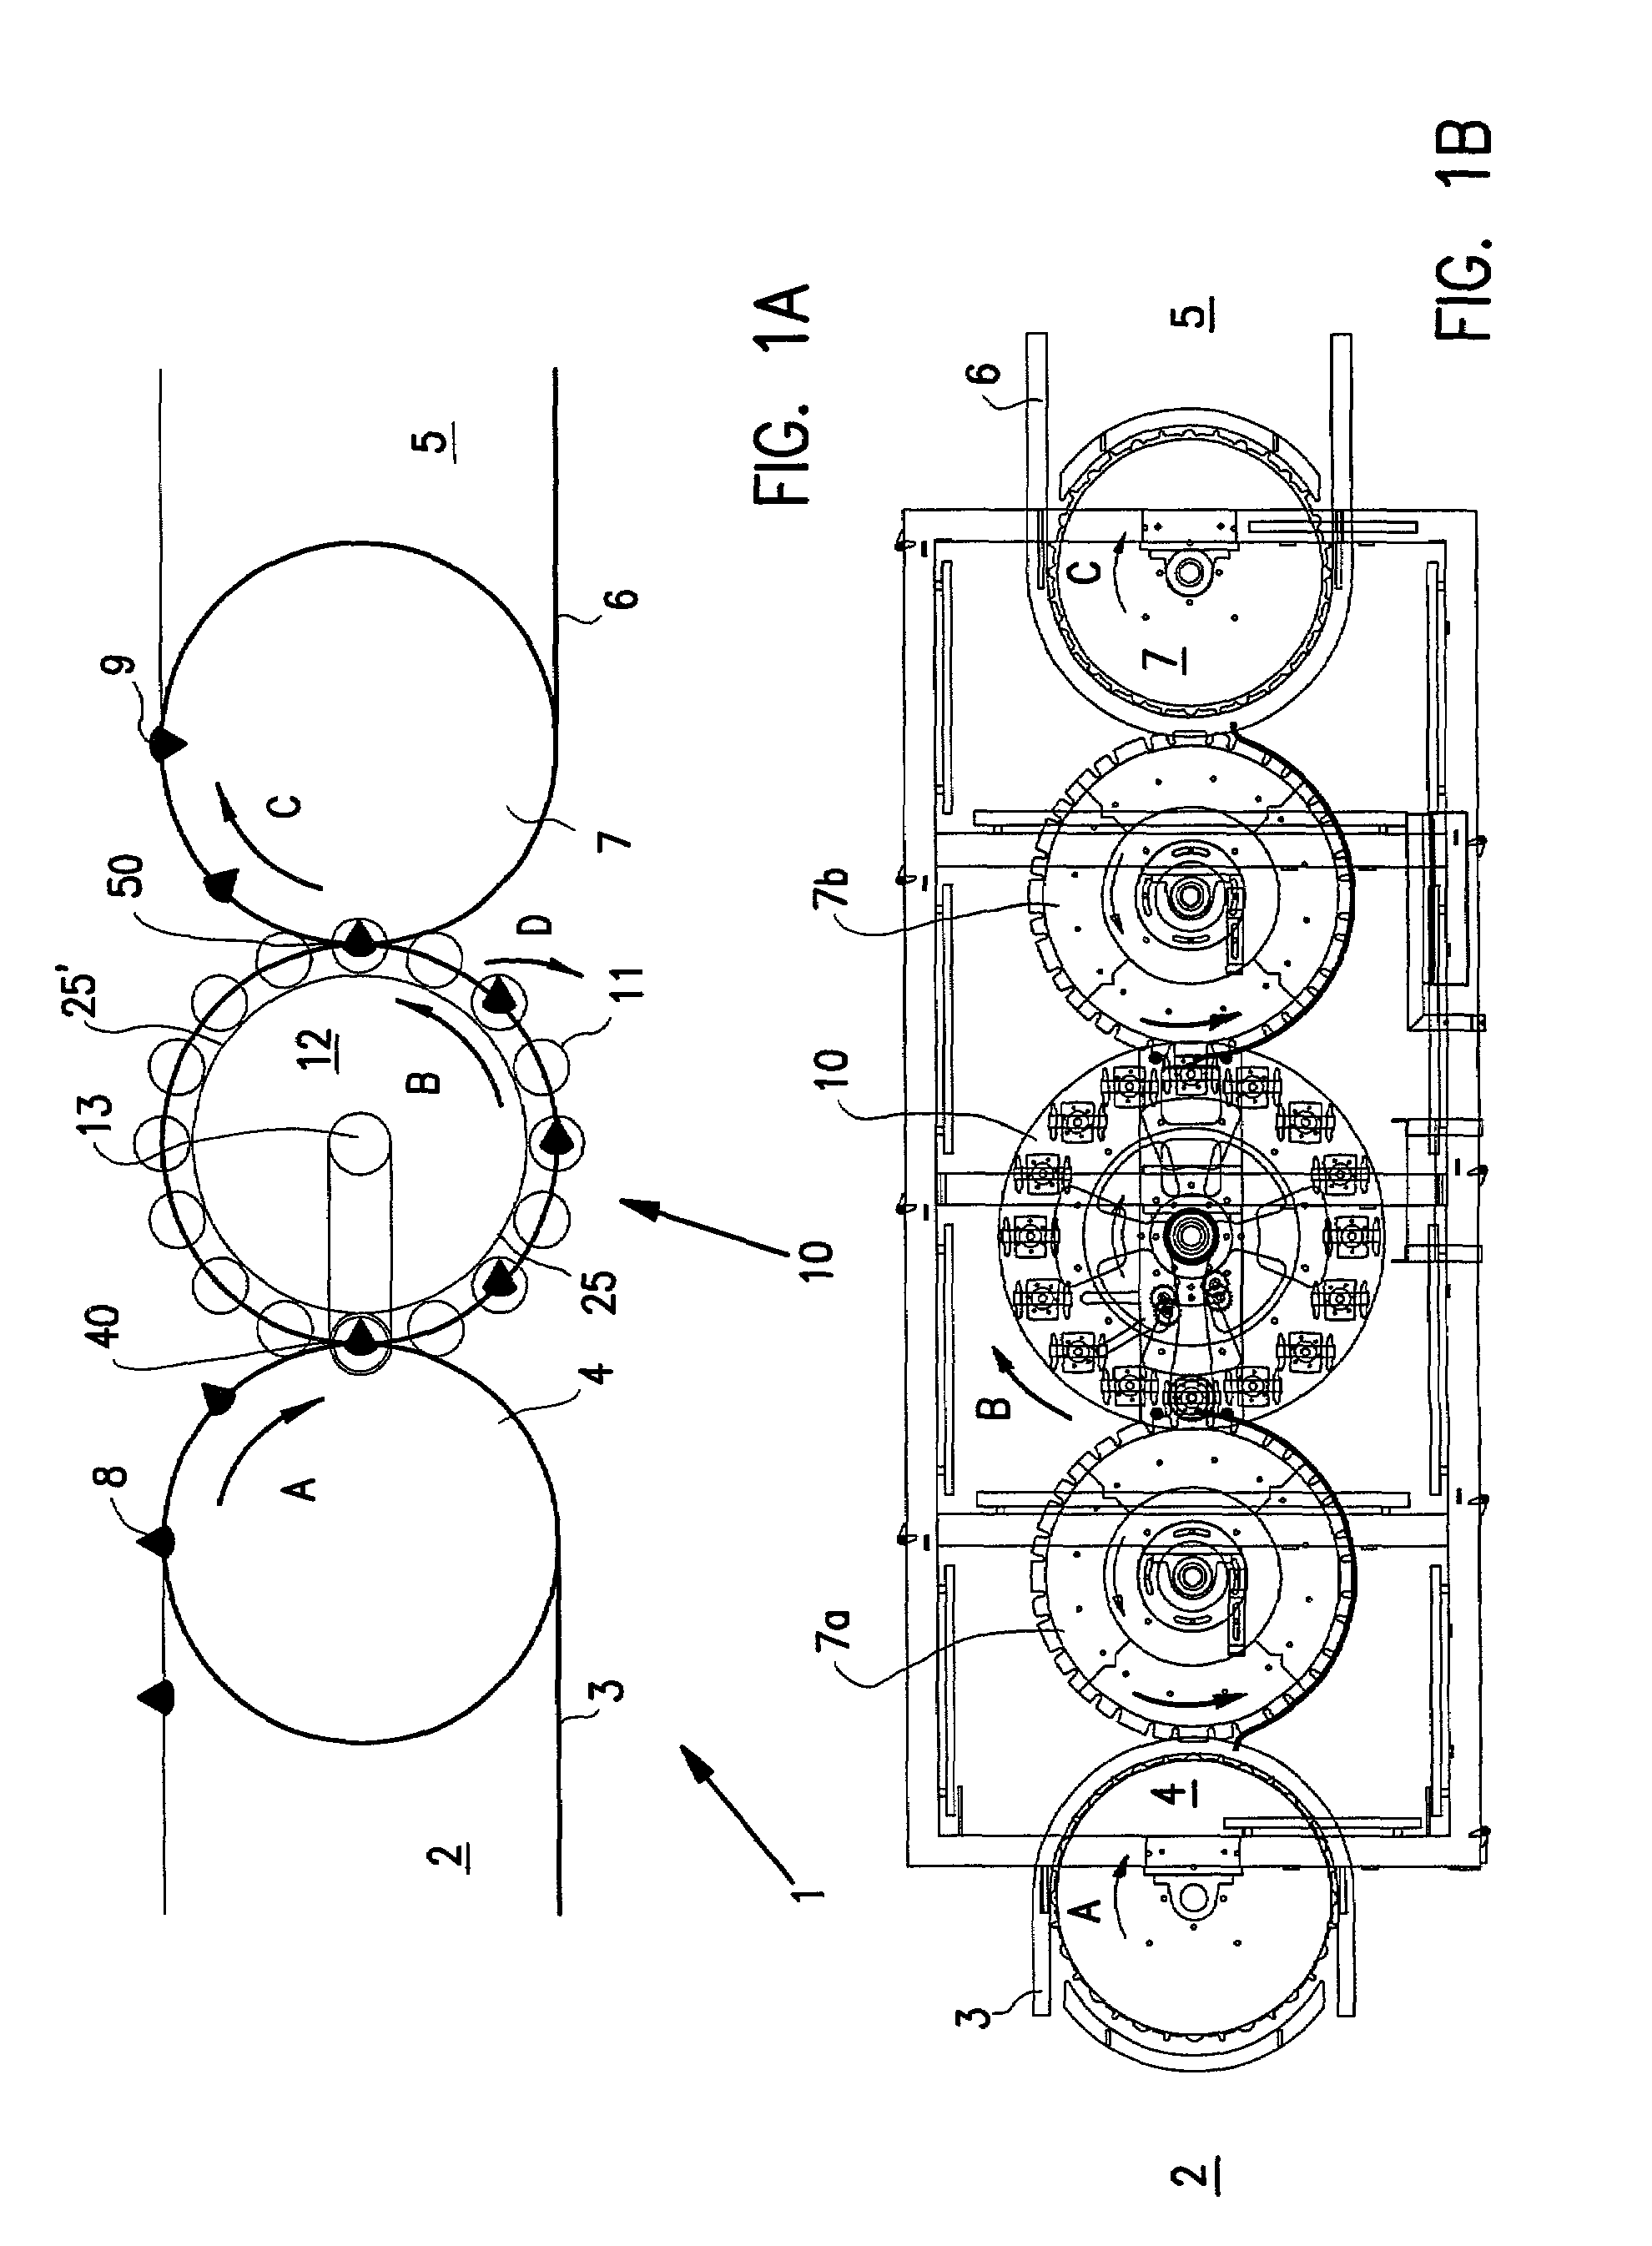 Apparatus for transferring poultry carcasses